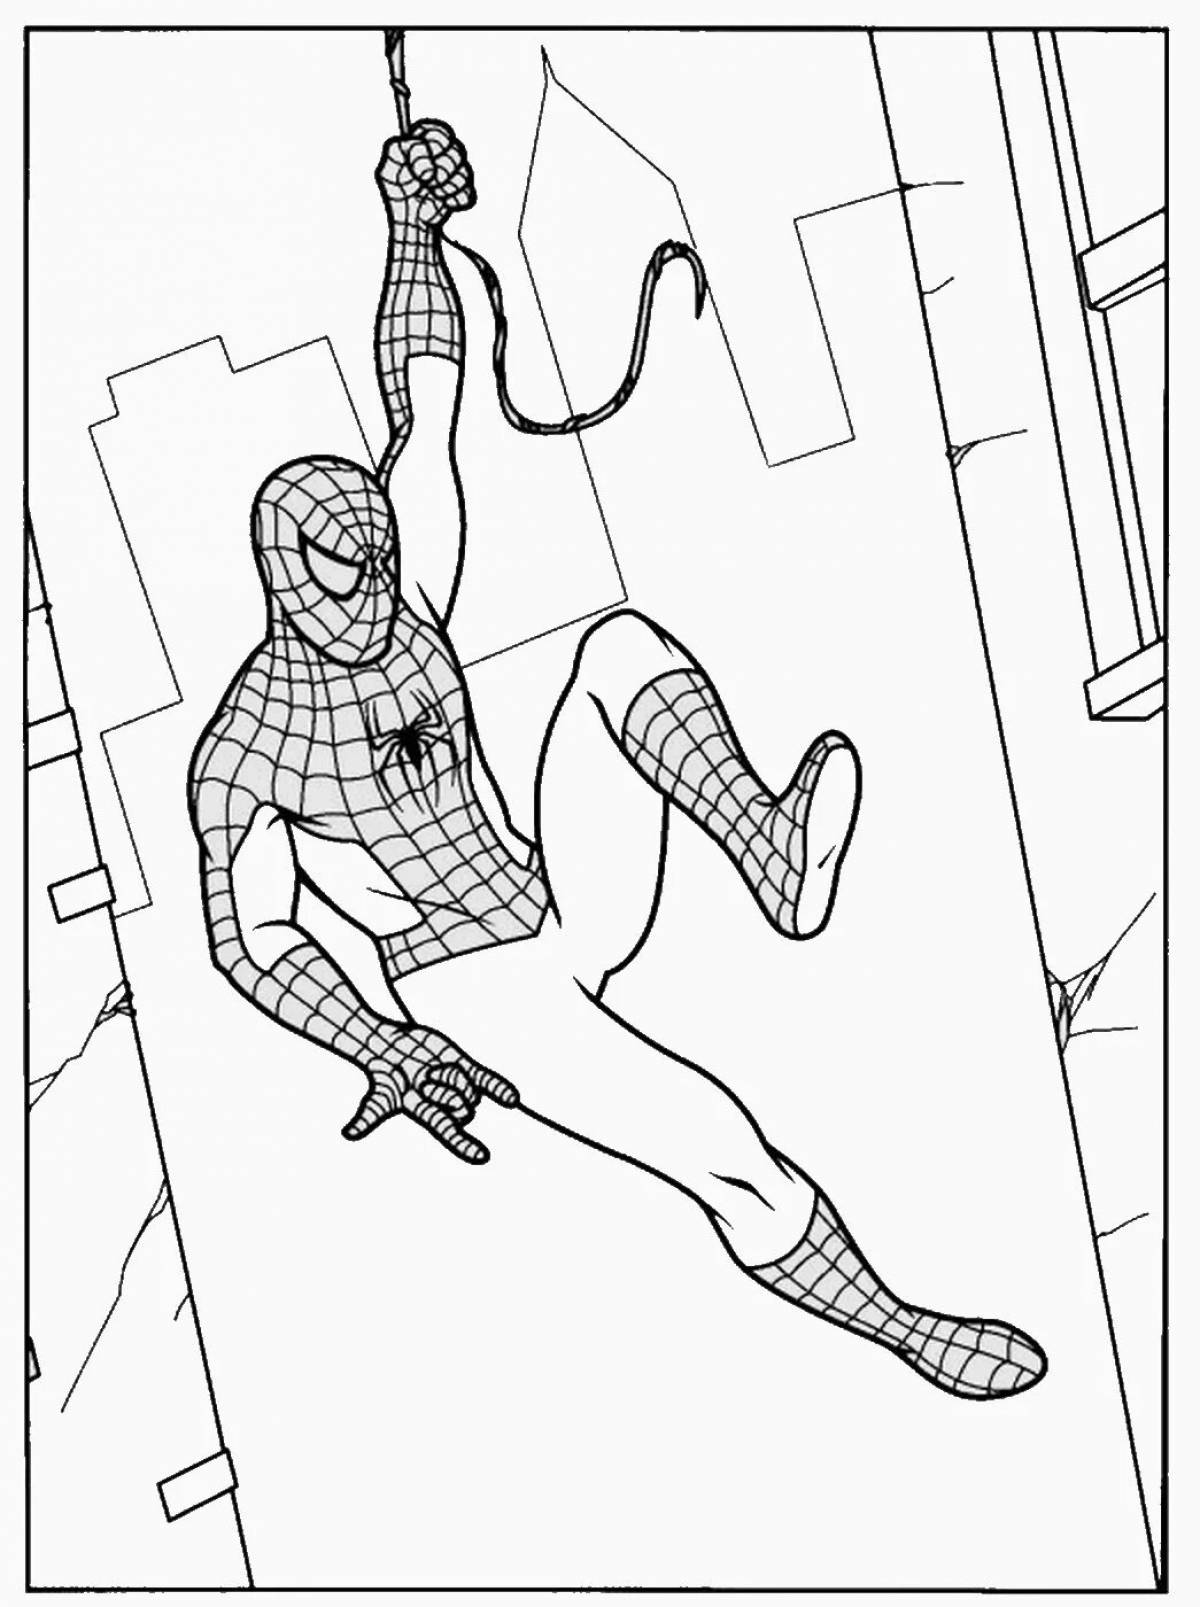 Coloring book charming spider-man antistress